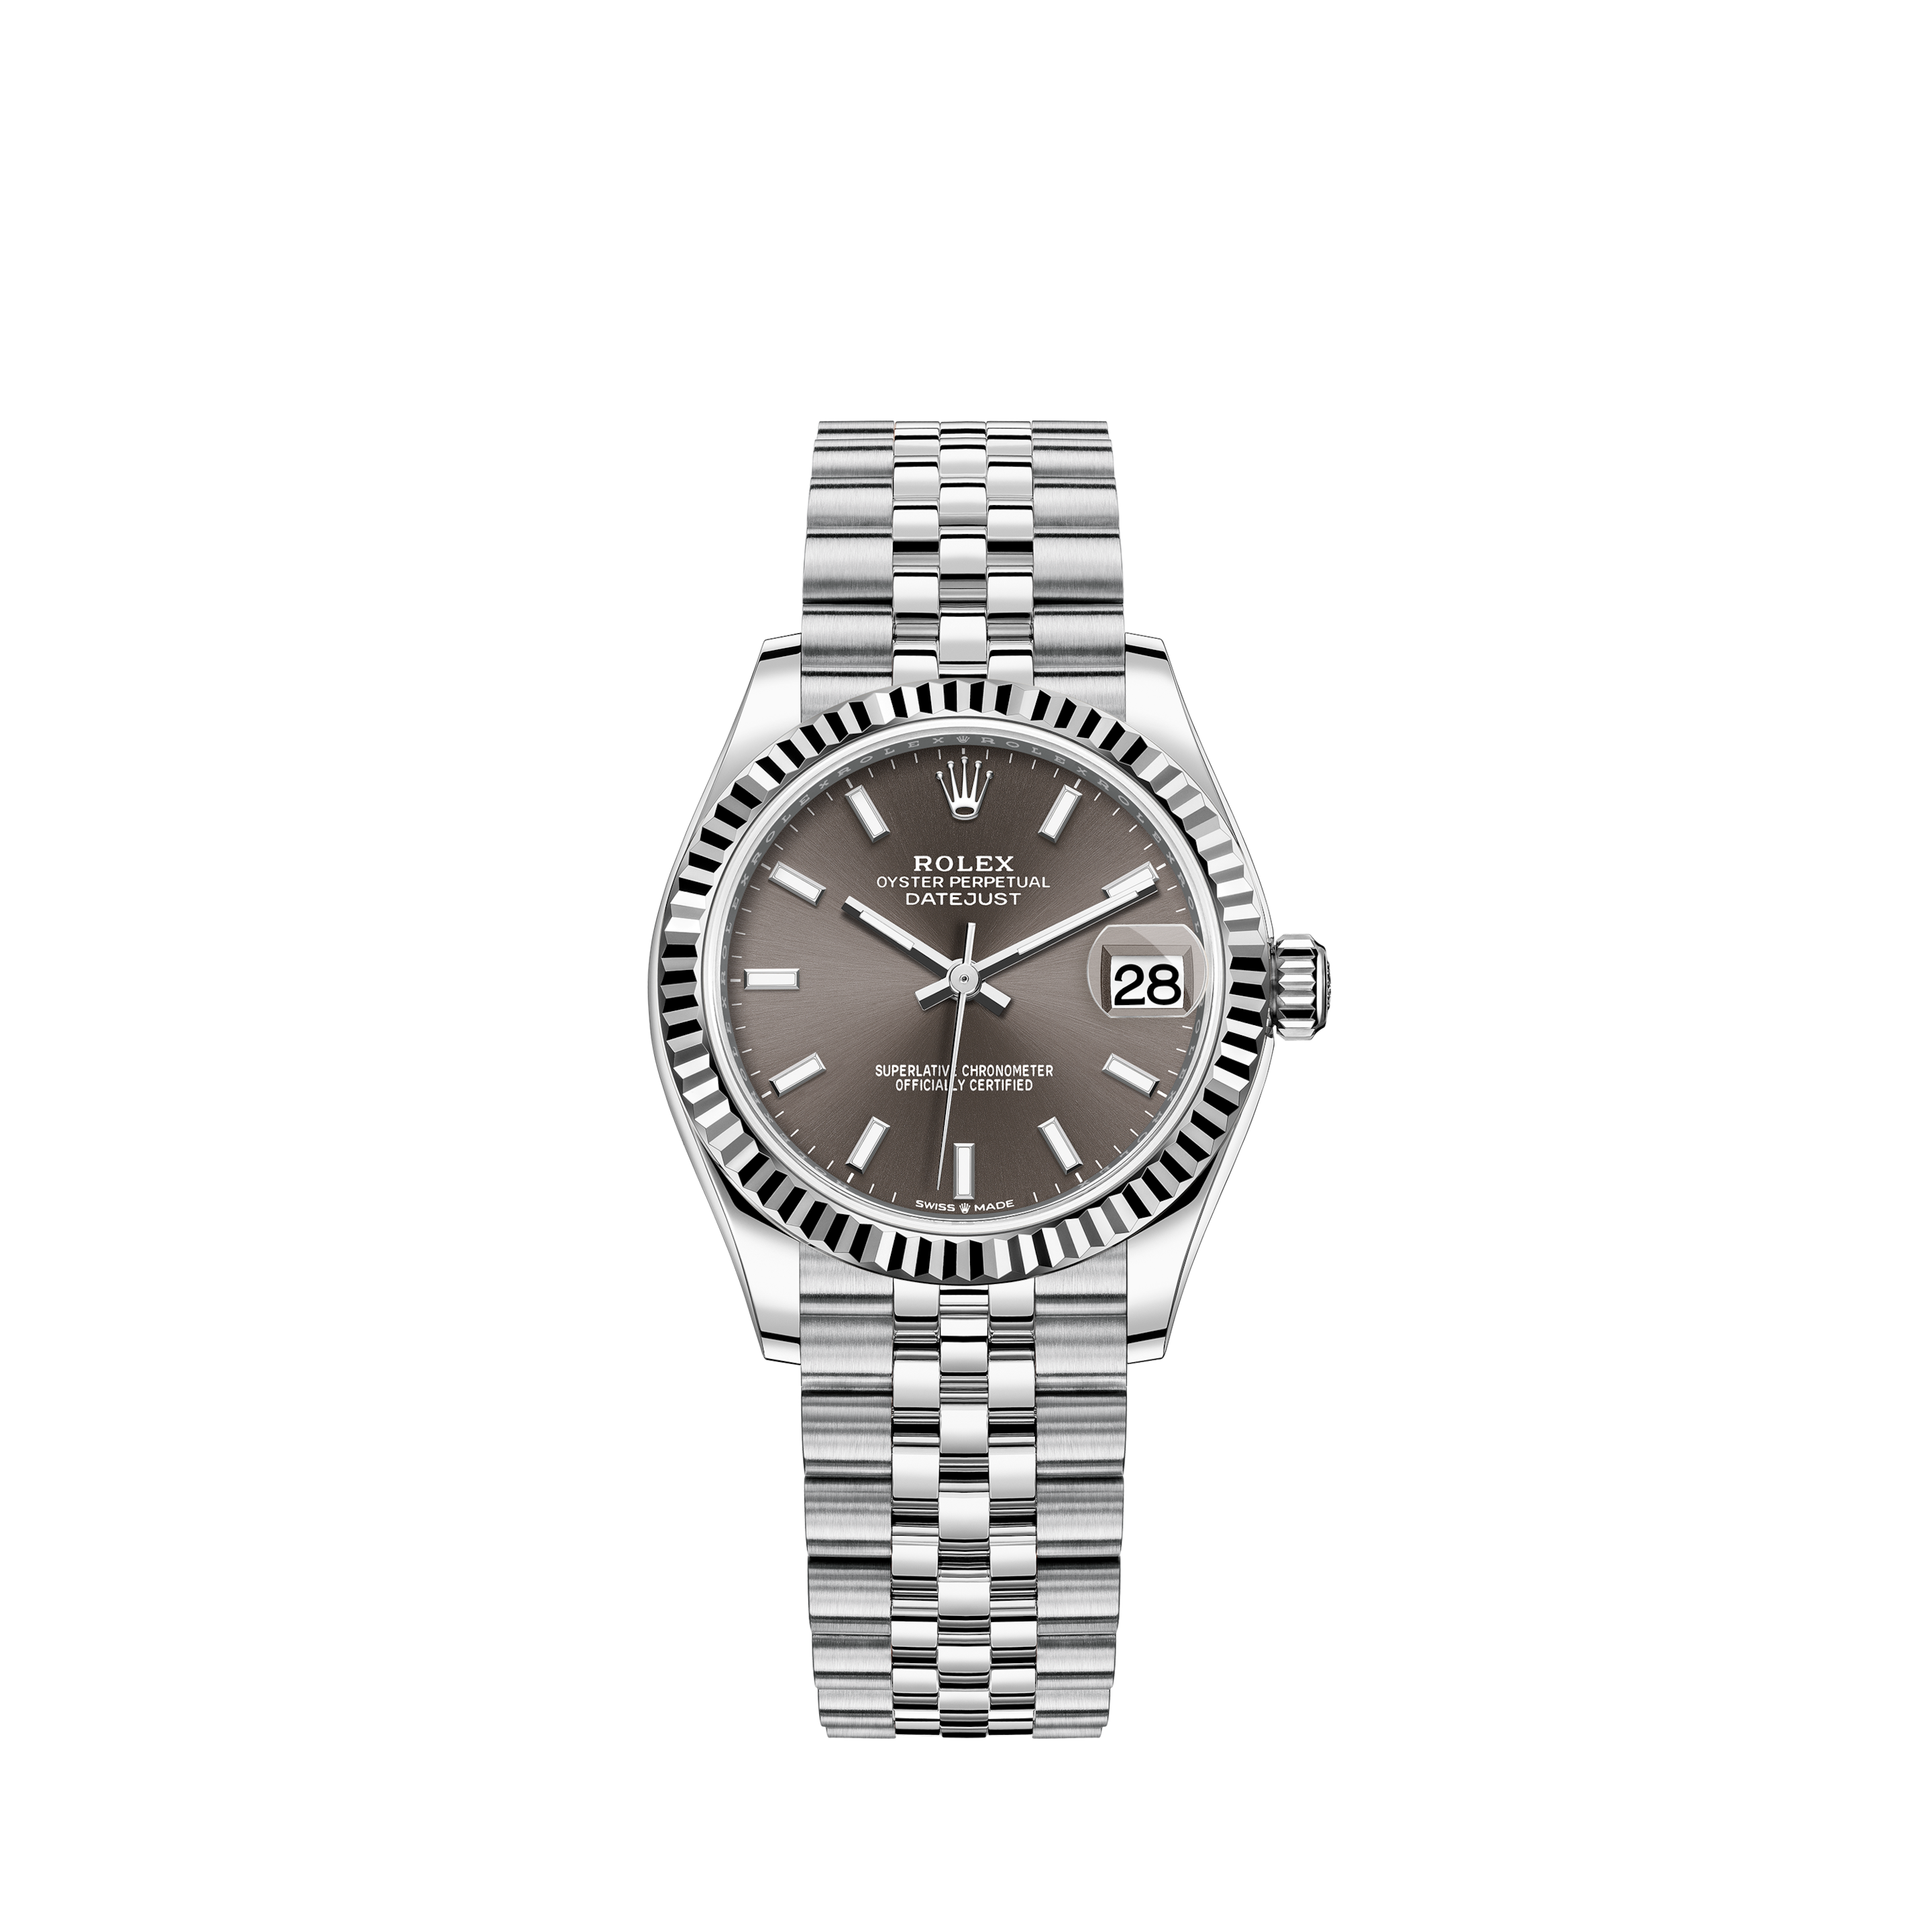 Rolex Datejust 36mm Dial Steel Rose Gold Diamond Watch 116231 Box CardRolex Datejust 36mm Diamond & Emerald Bezel Black Color Dial with Diamond Numbers & Lugs